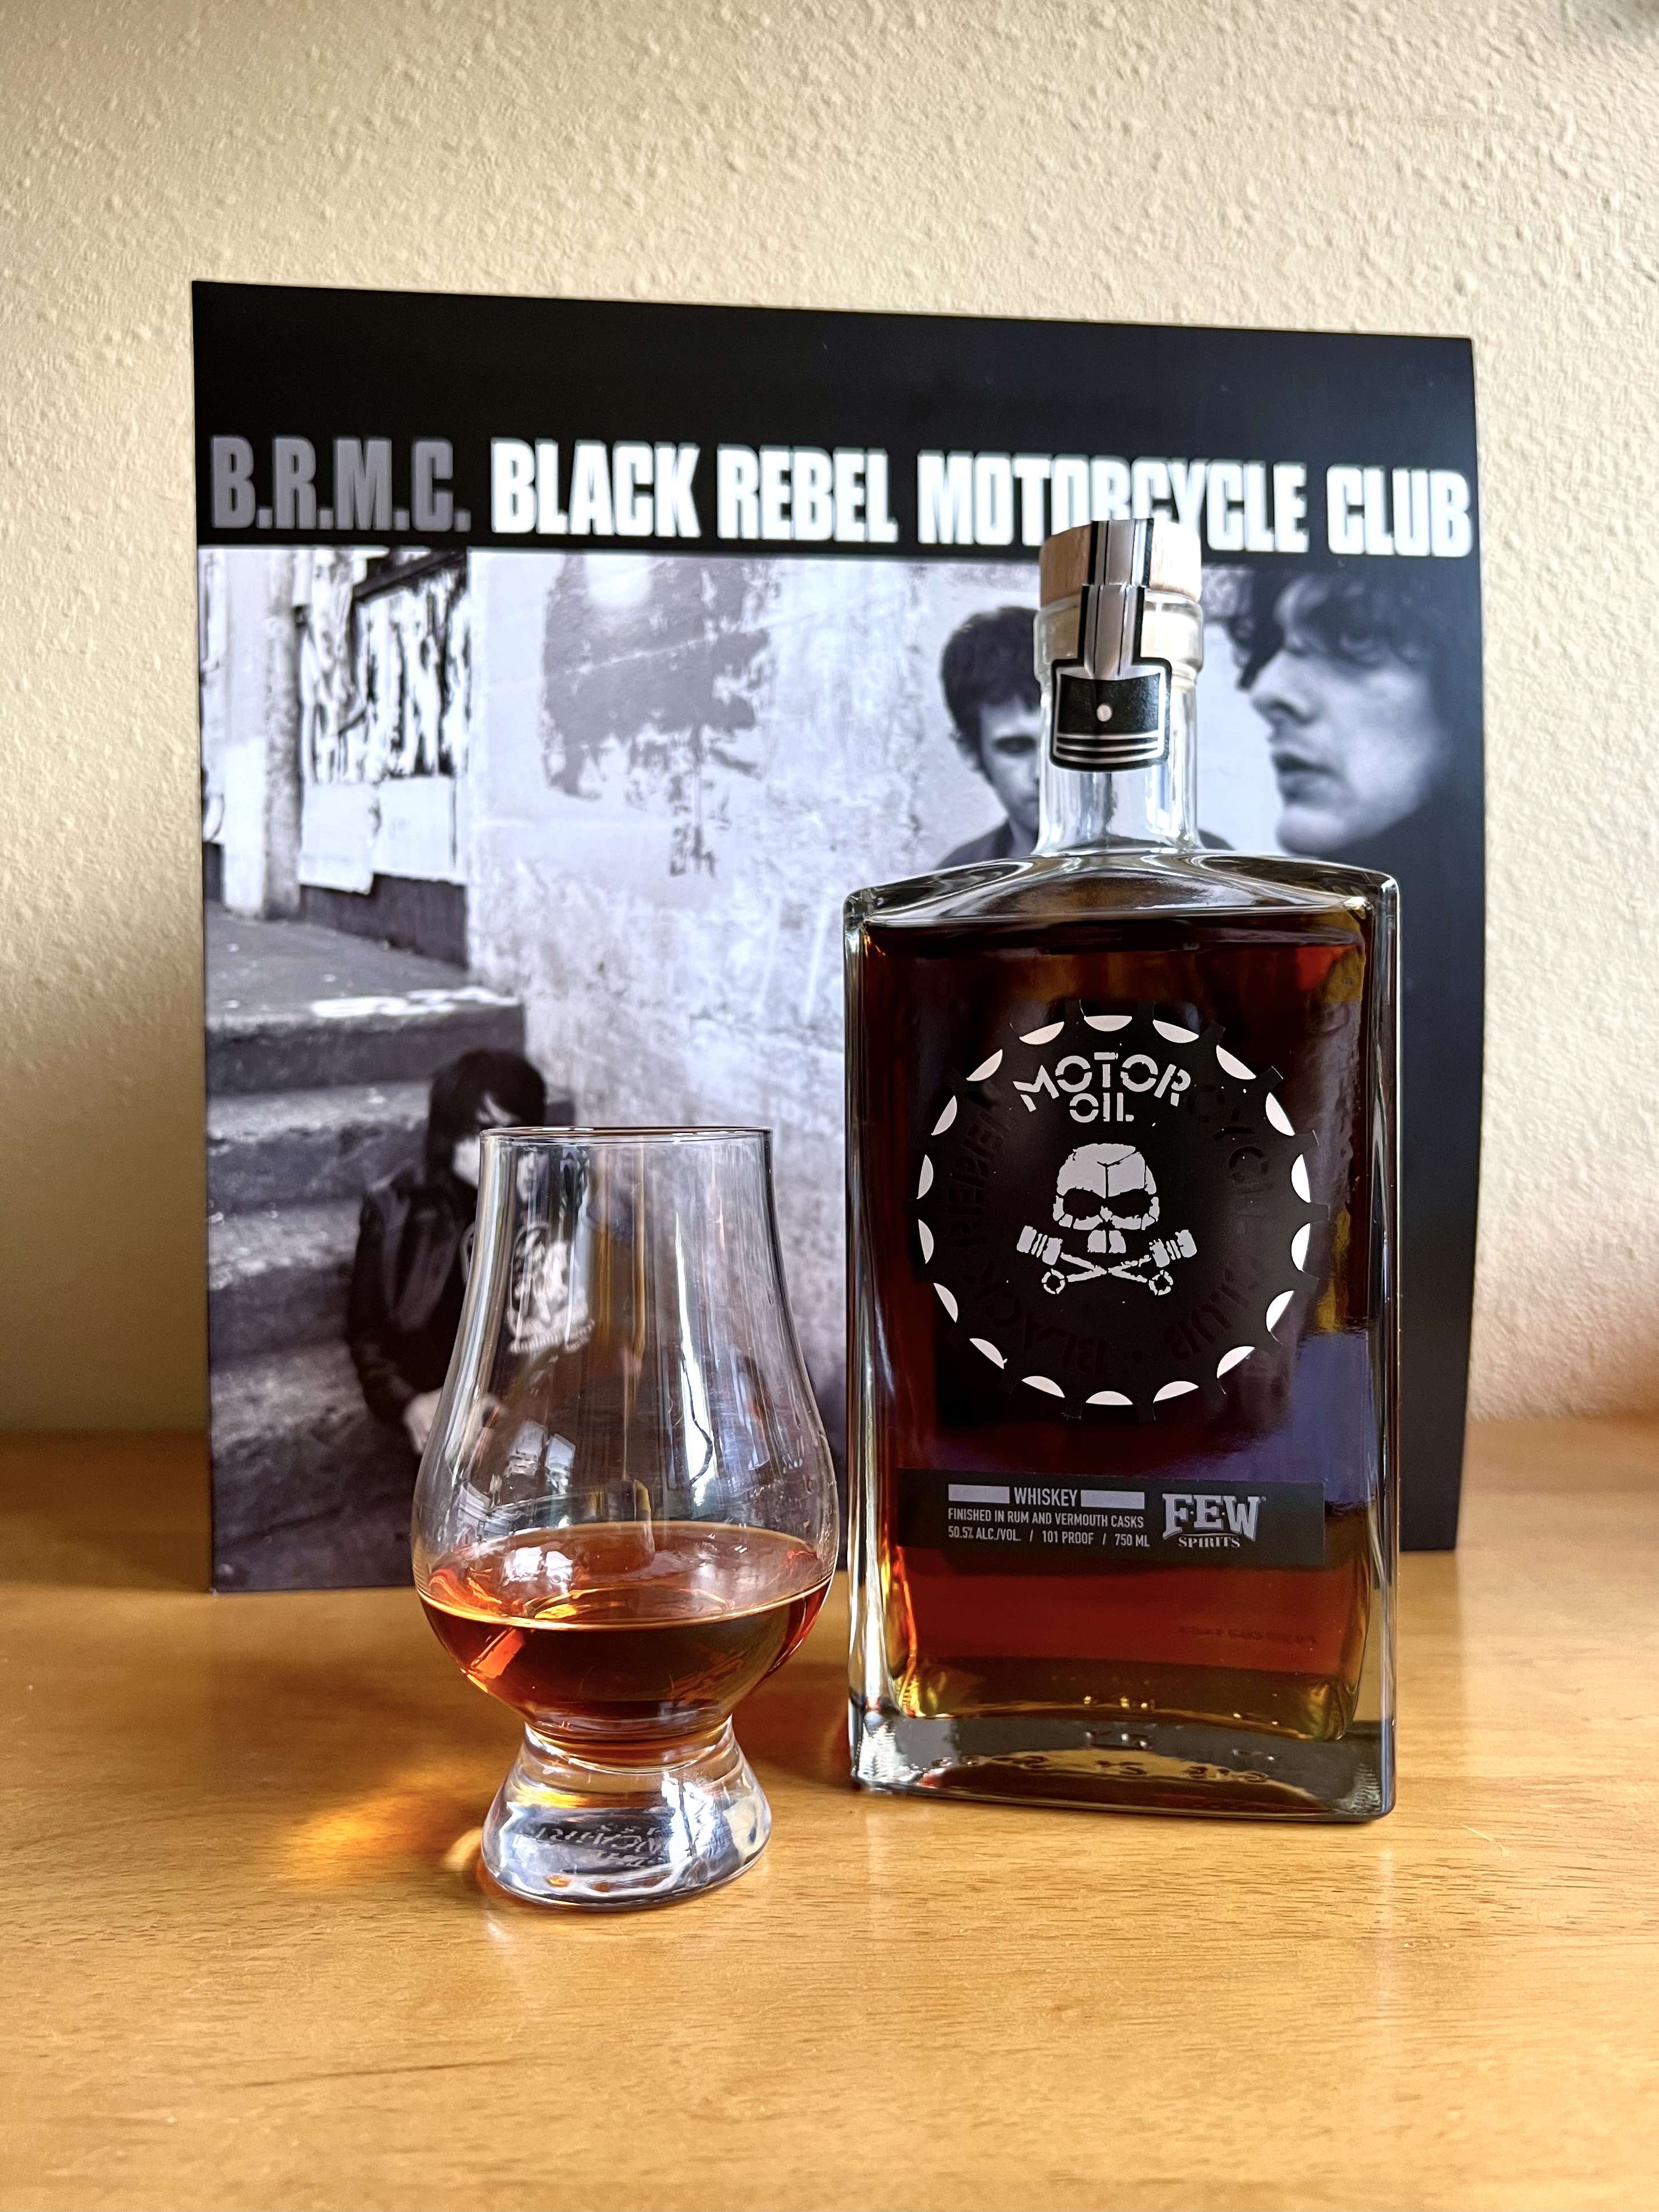 FEW Spirits and Black Rebel Motorcycle Club collaborate on Motor Oil Whiskey, a 101 proof blended whiskey that'll impress fans of this legendary band.